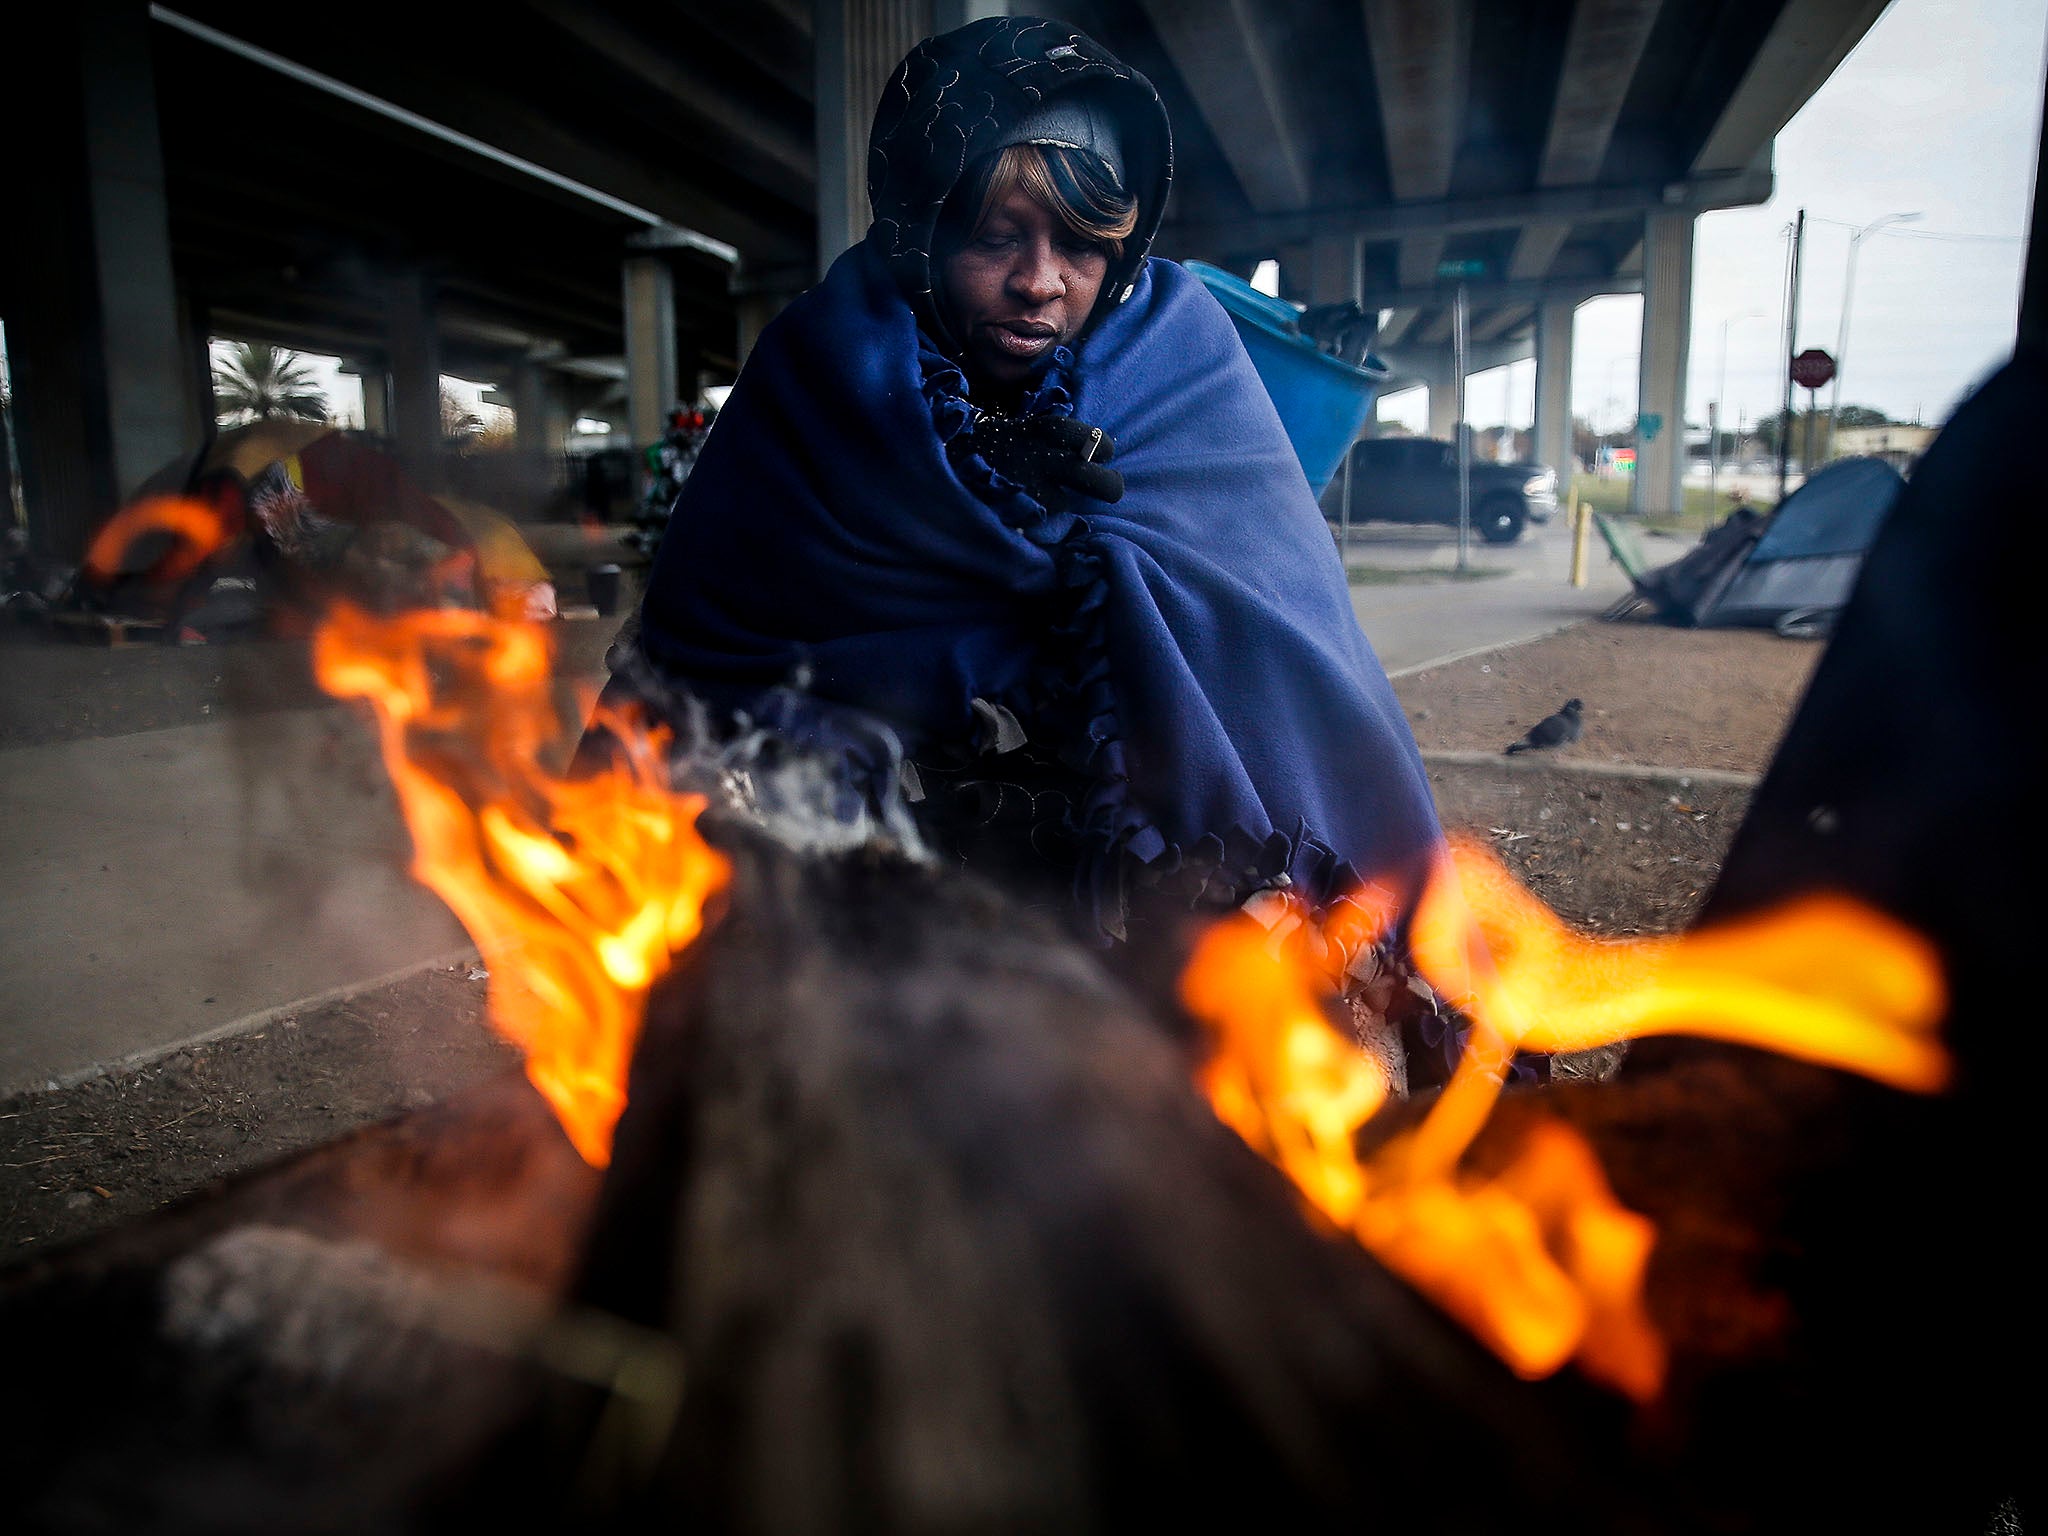 &#13;
Tony Sampson tries to warm up by a fire under the Eastex Freeway in Houston, Texas, as temperatures drop &#13;